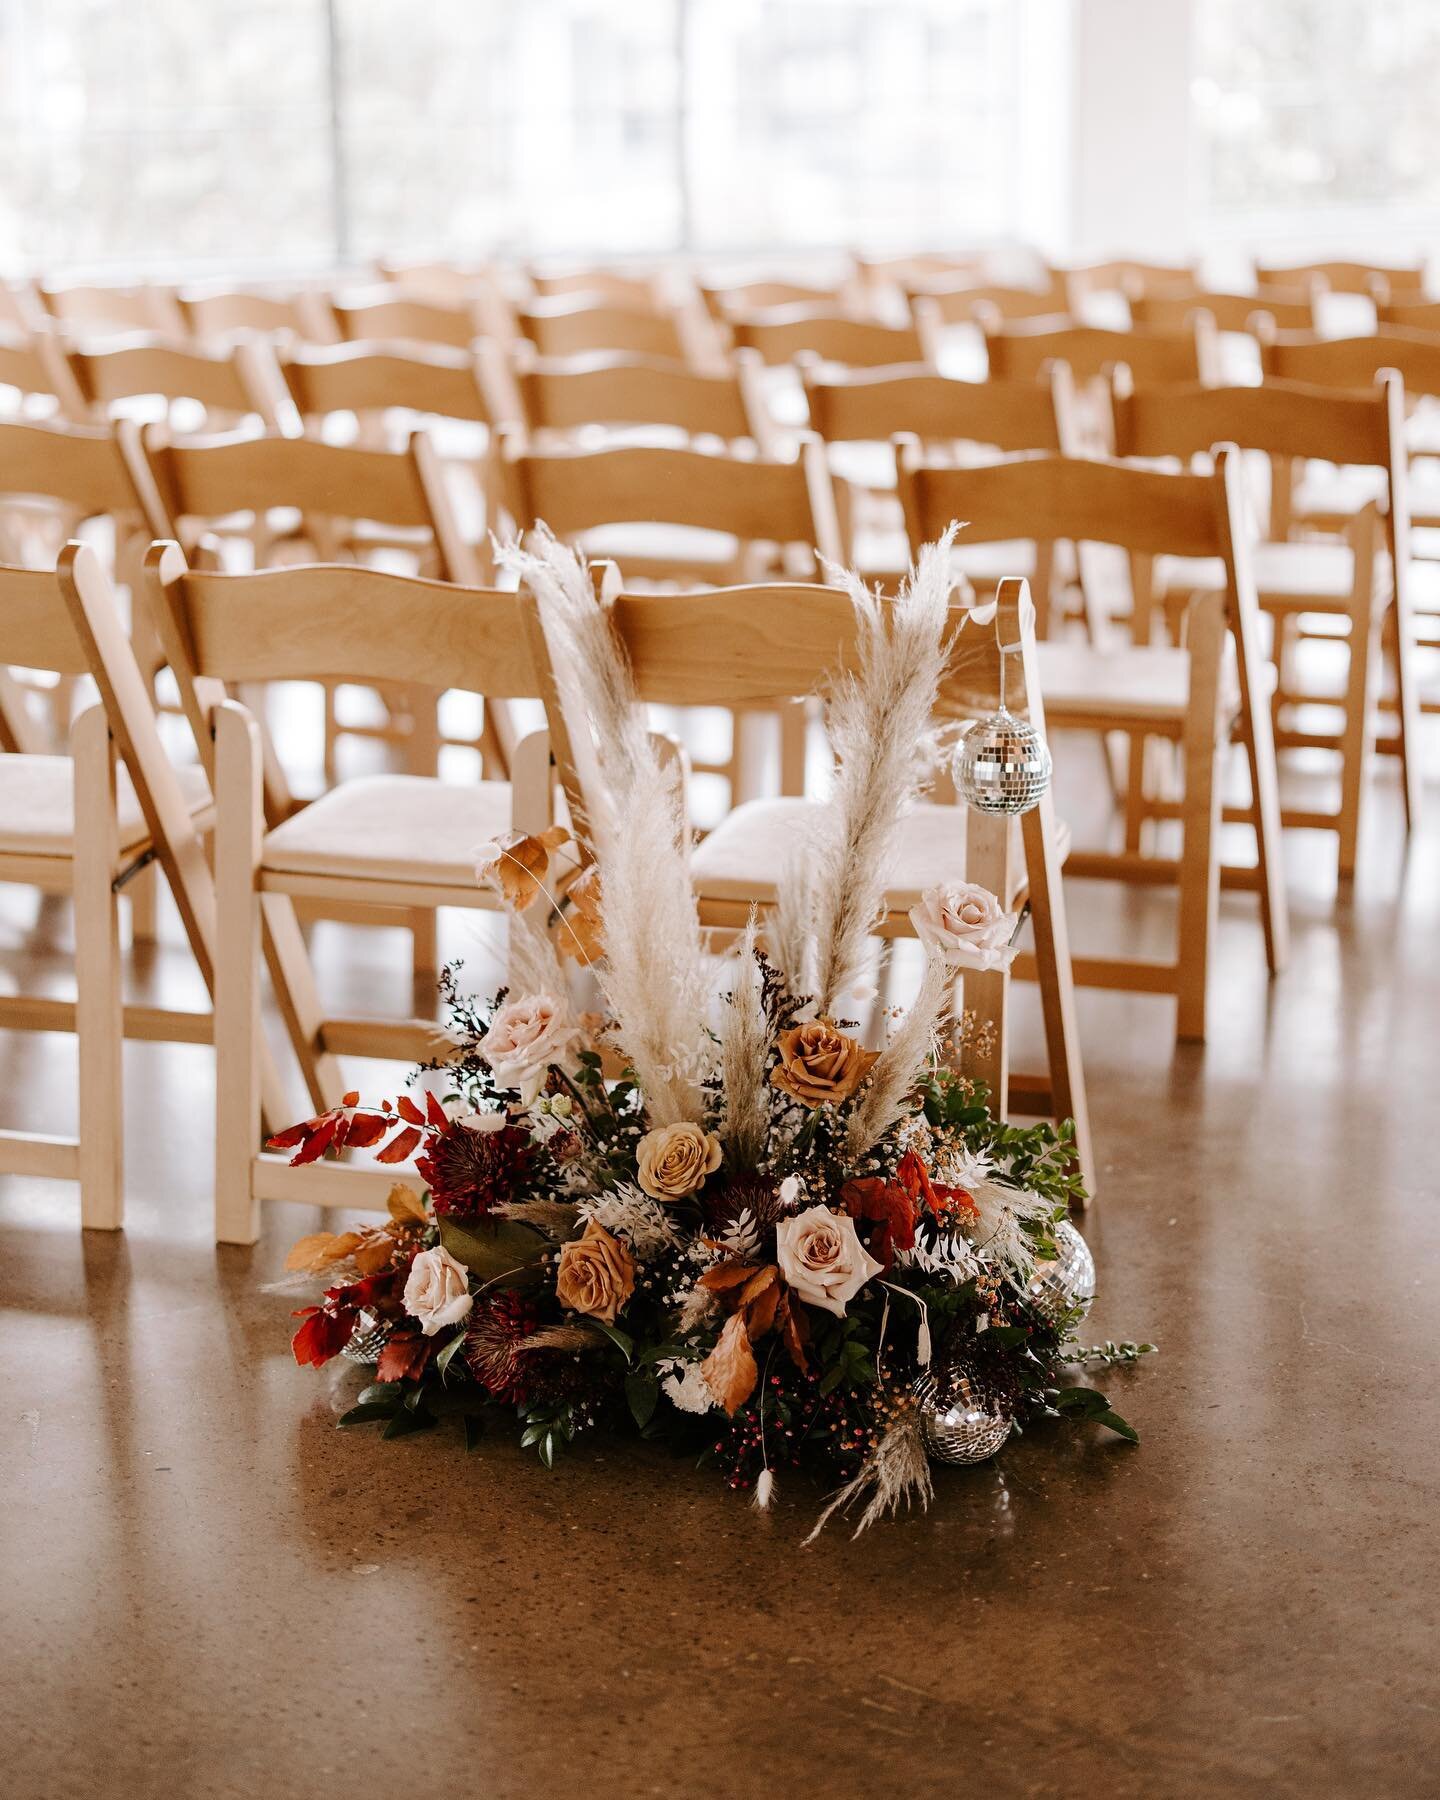 Always repurpose ceremony florals when they can be placed appropriately. It can help maximize budget and leave no florals left behind! These aisle pieces were easily transferred in front of the bride and groom for added decor! 

Photo @heather.photo 